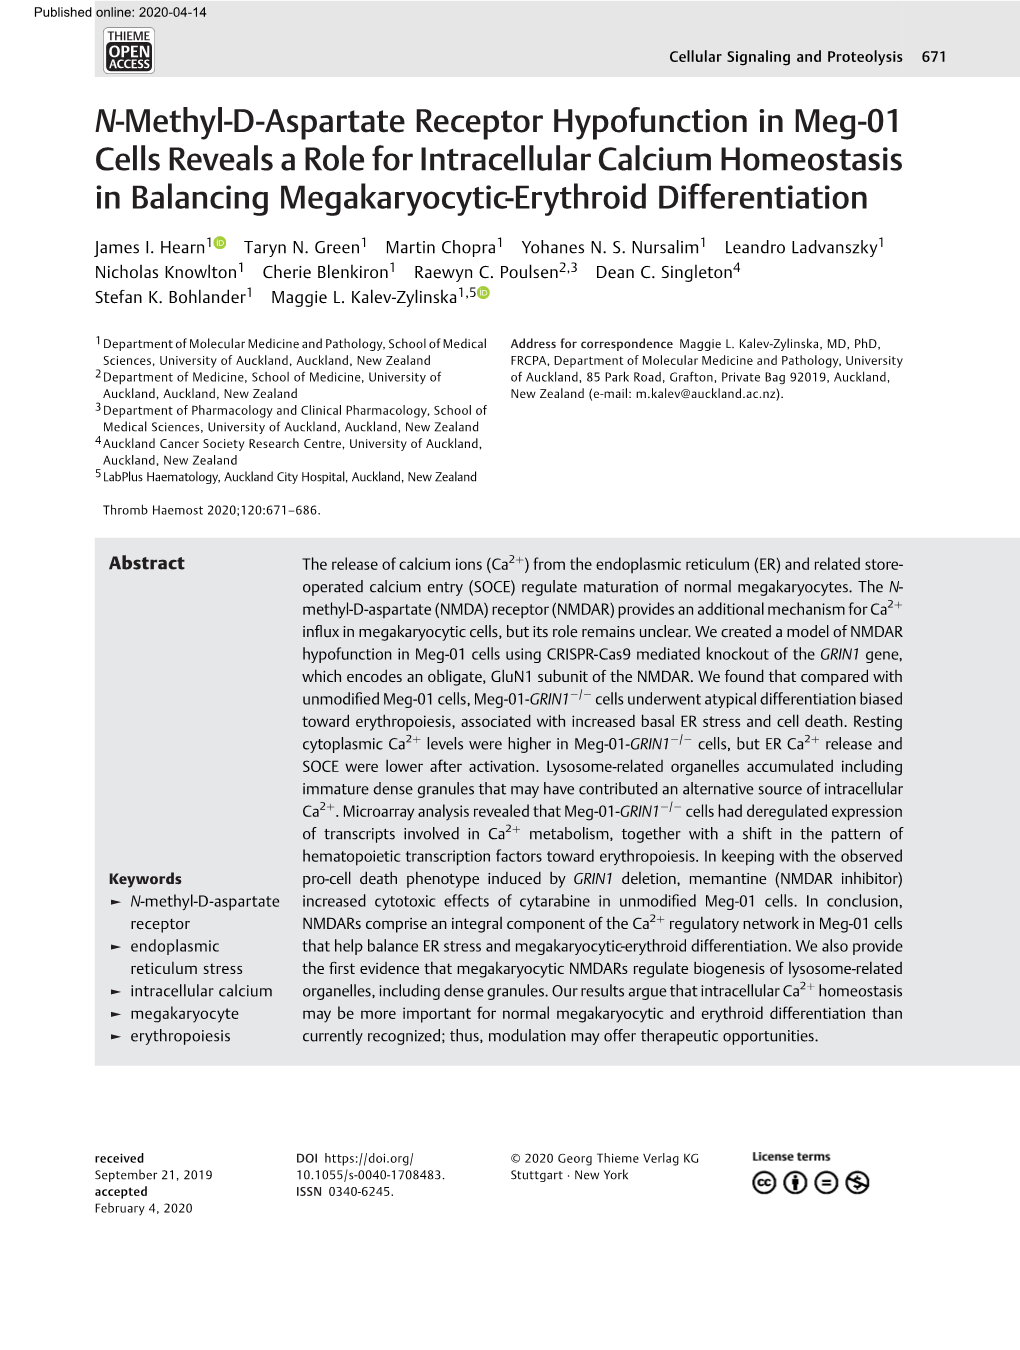 N-Methyl-D-Aspartate Receptor Hypofunction in Meg-01 Cells Reveals a Role for Intracellular Calcium Homeostasis in Balancing Megakaryocytic-Erythroid Differentiation